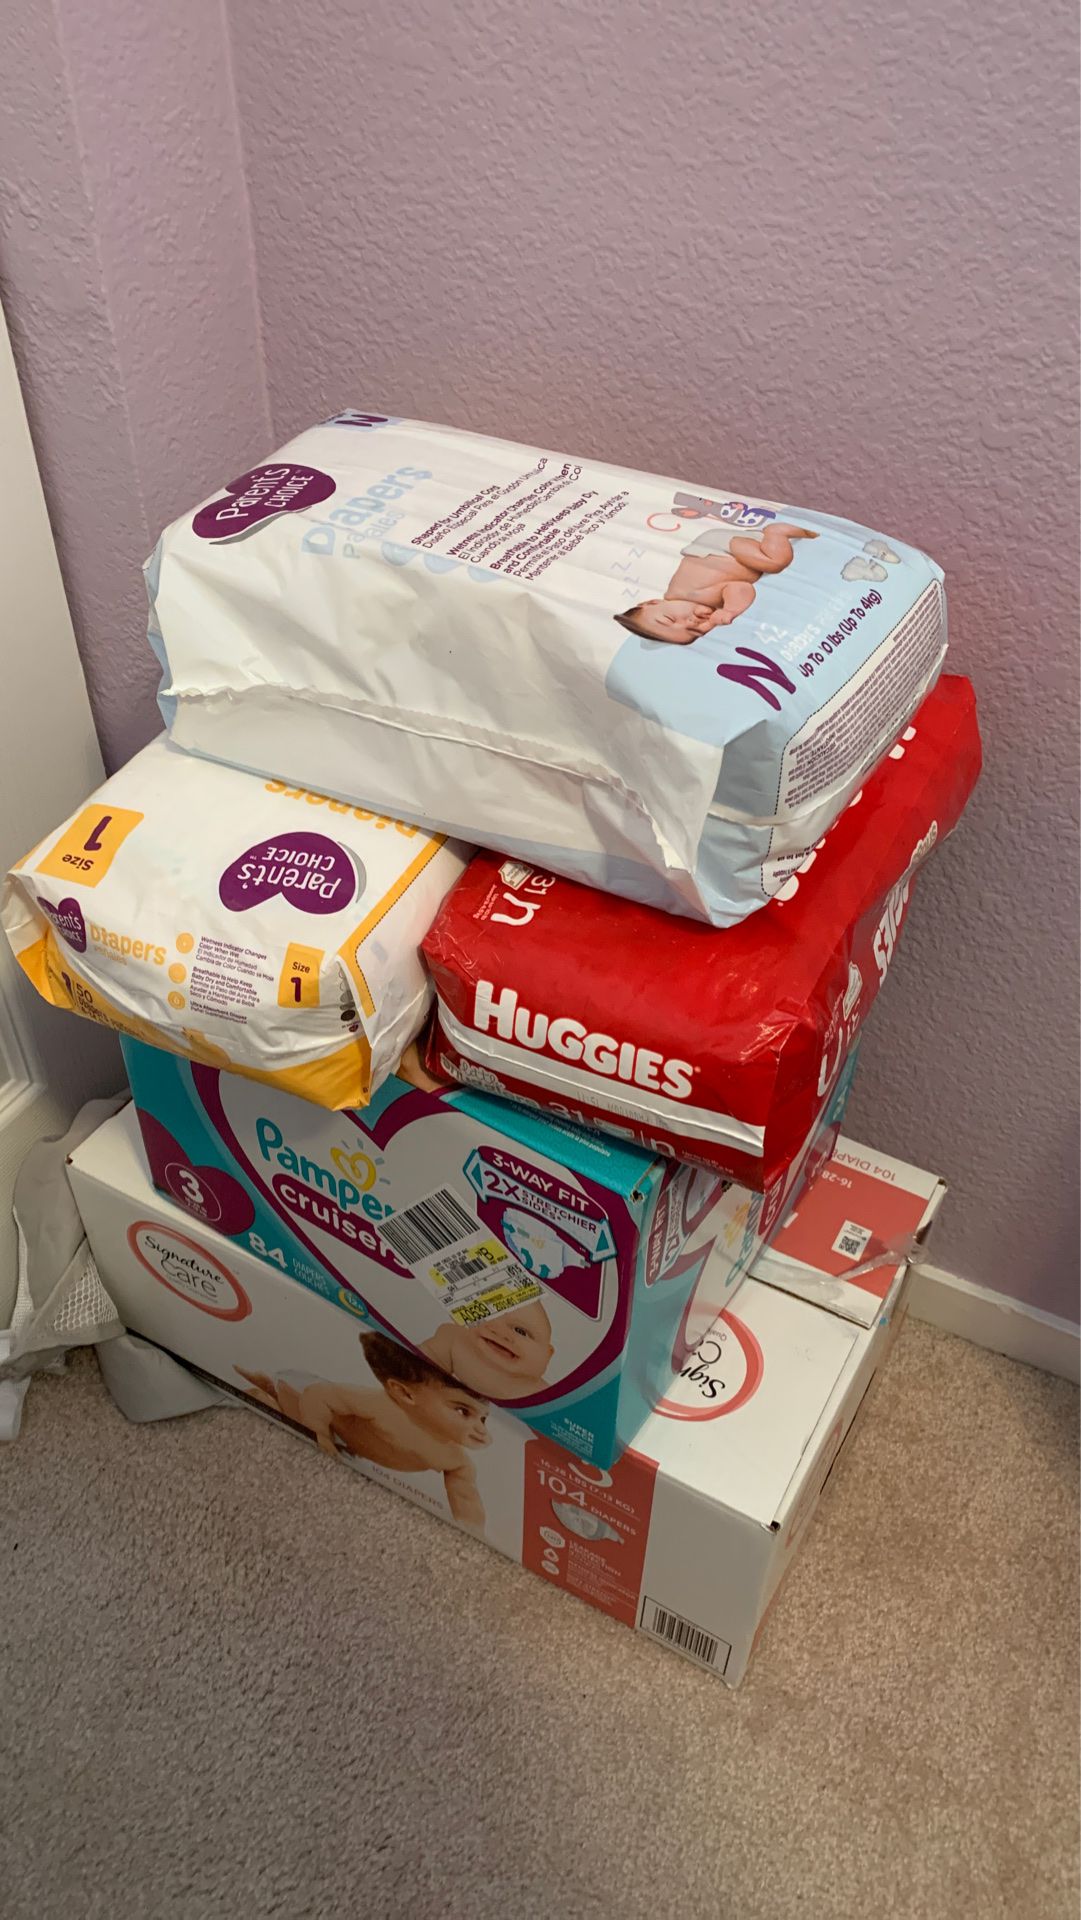 Newborn, Size 1 and Size 3 diapers